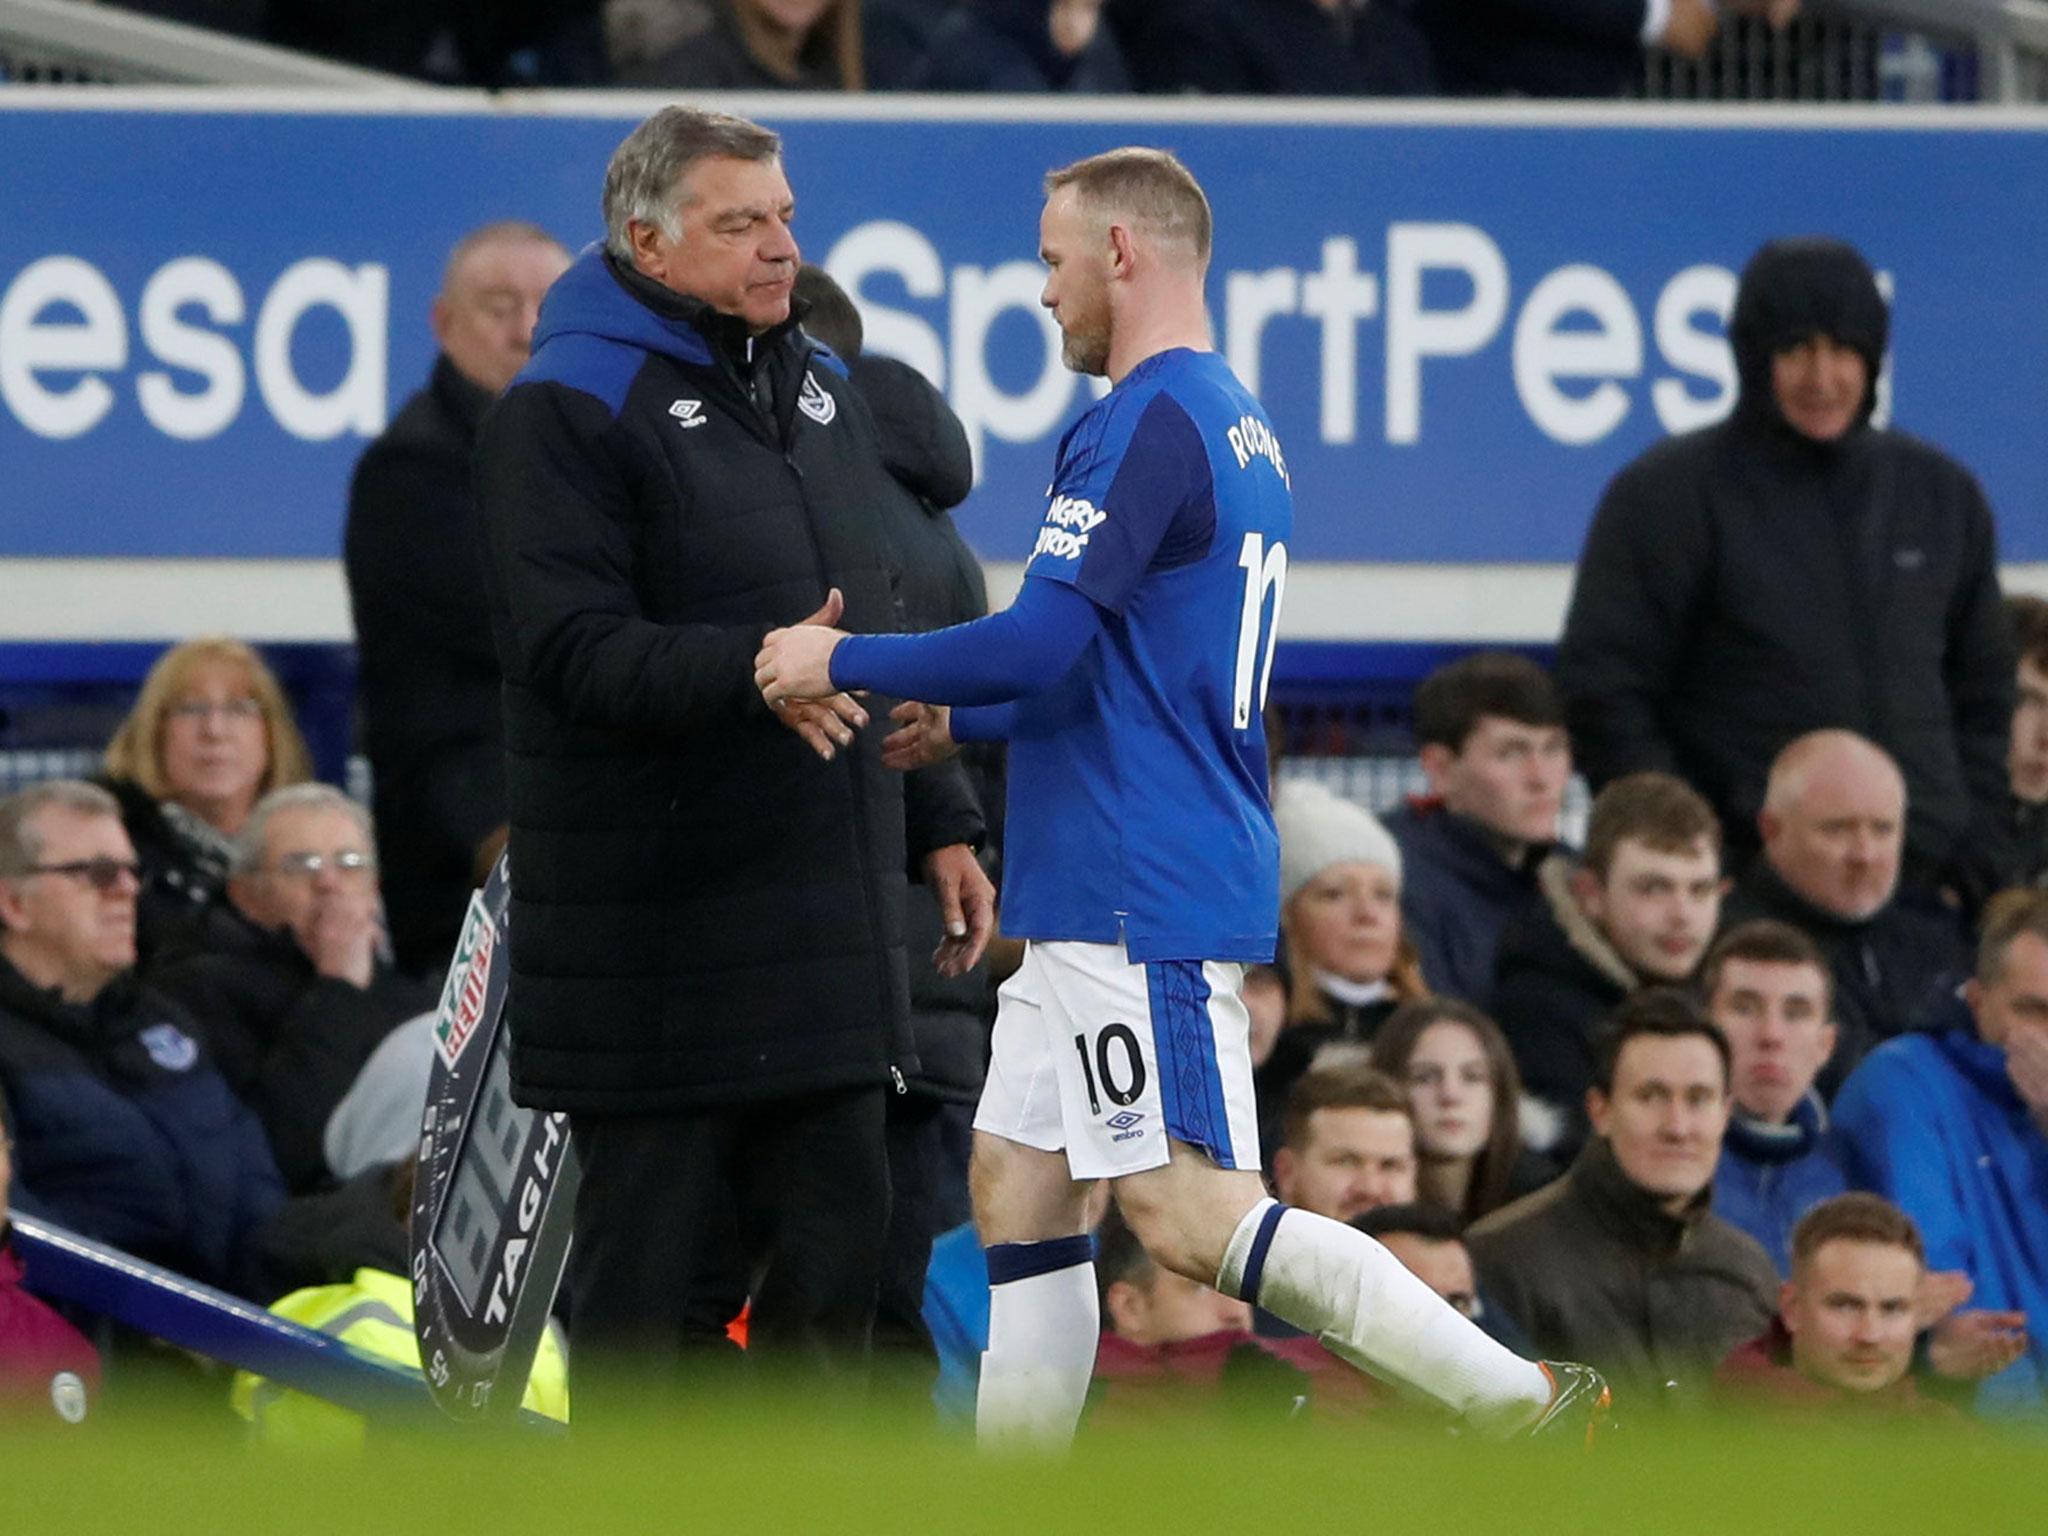 Rooney's playing time has been cut in recent weeks (Getty)